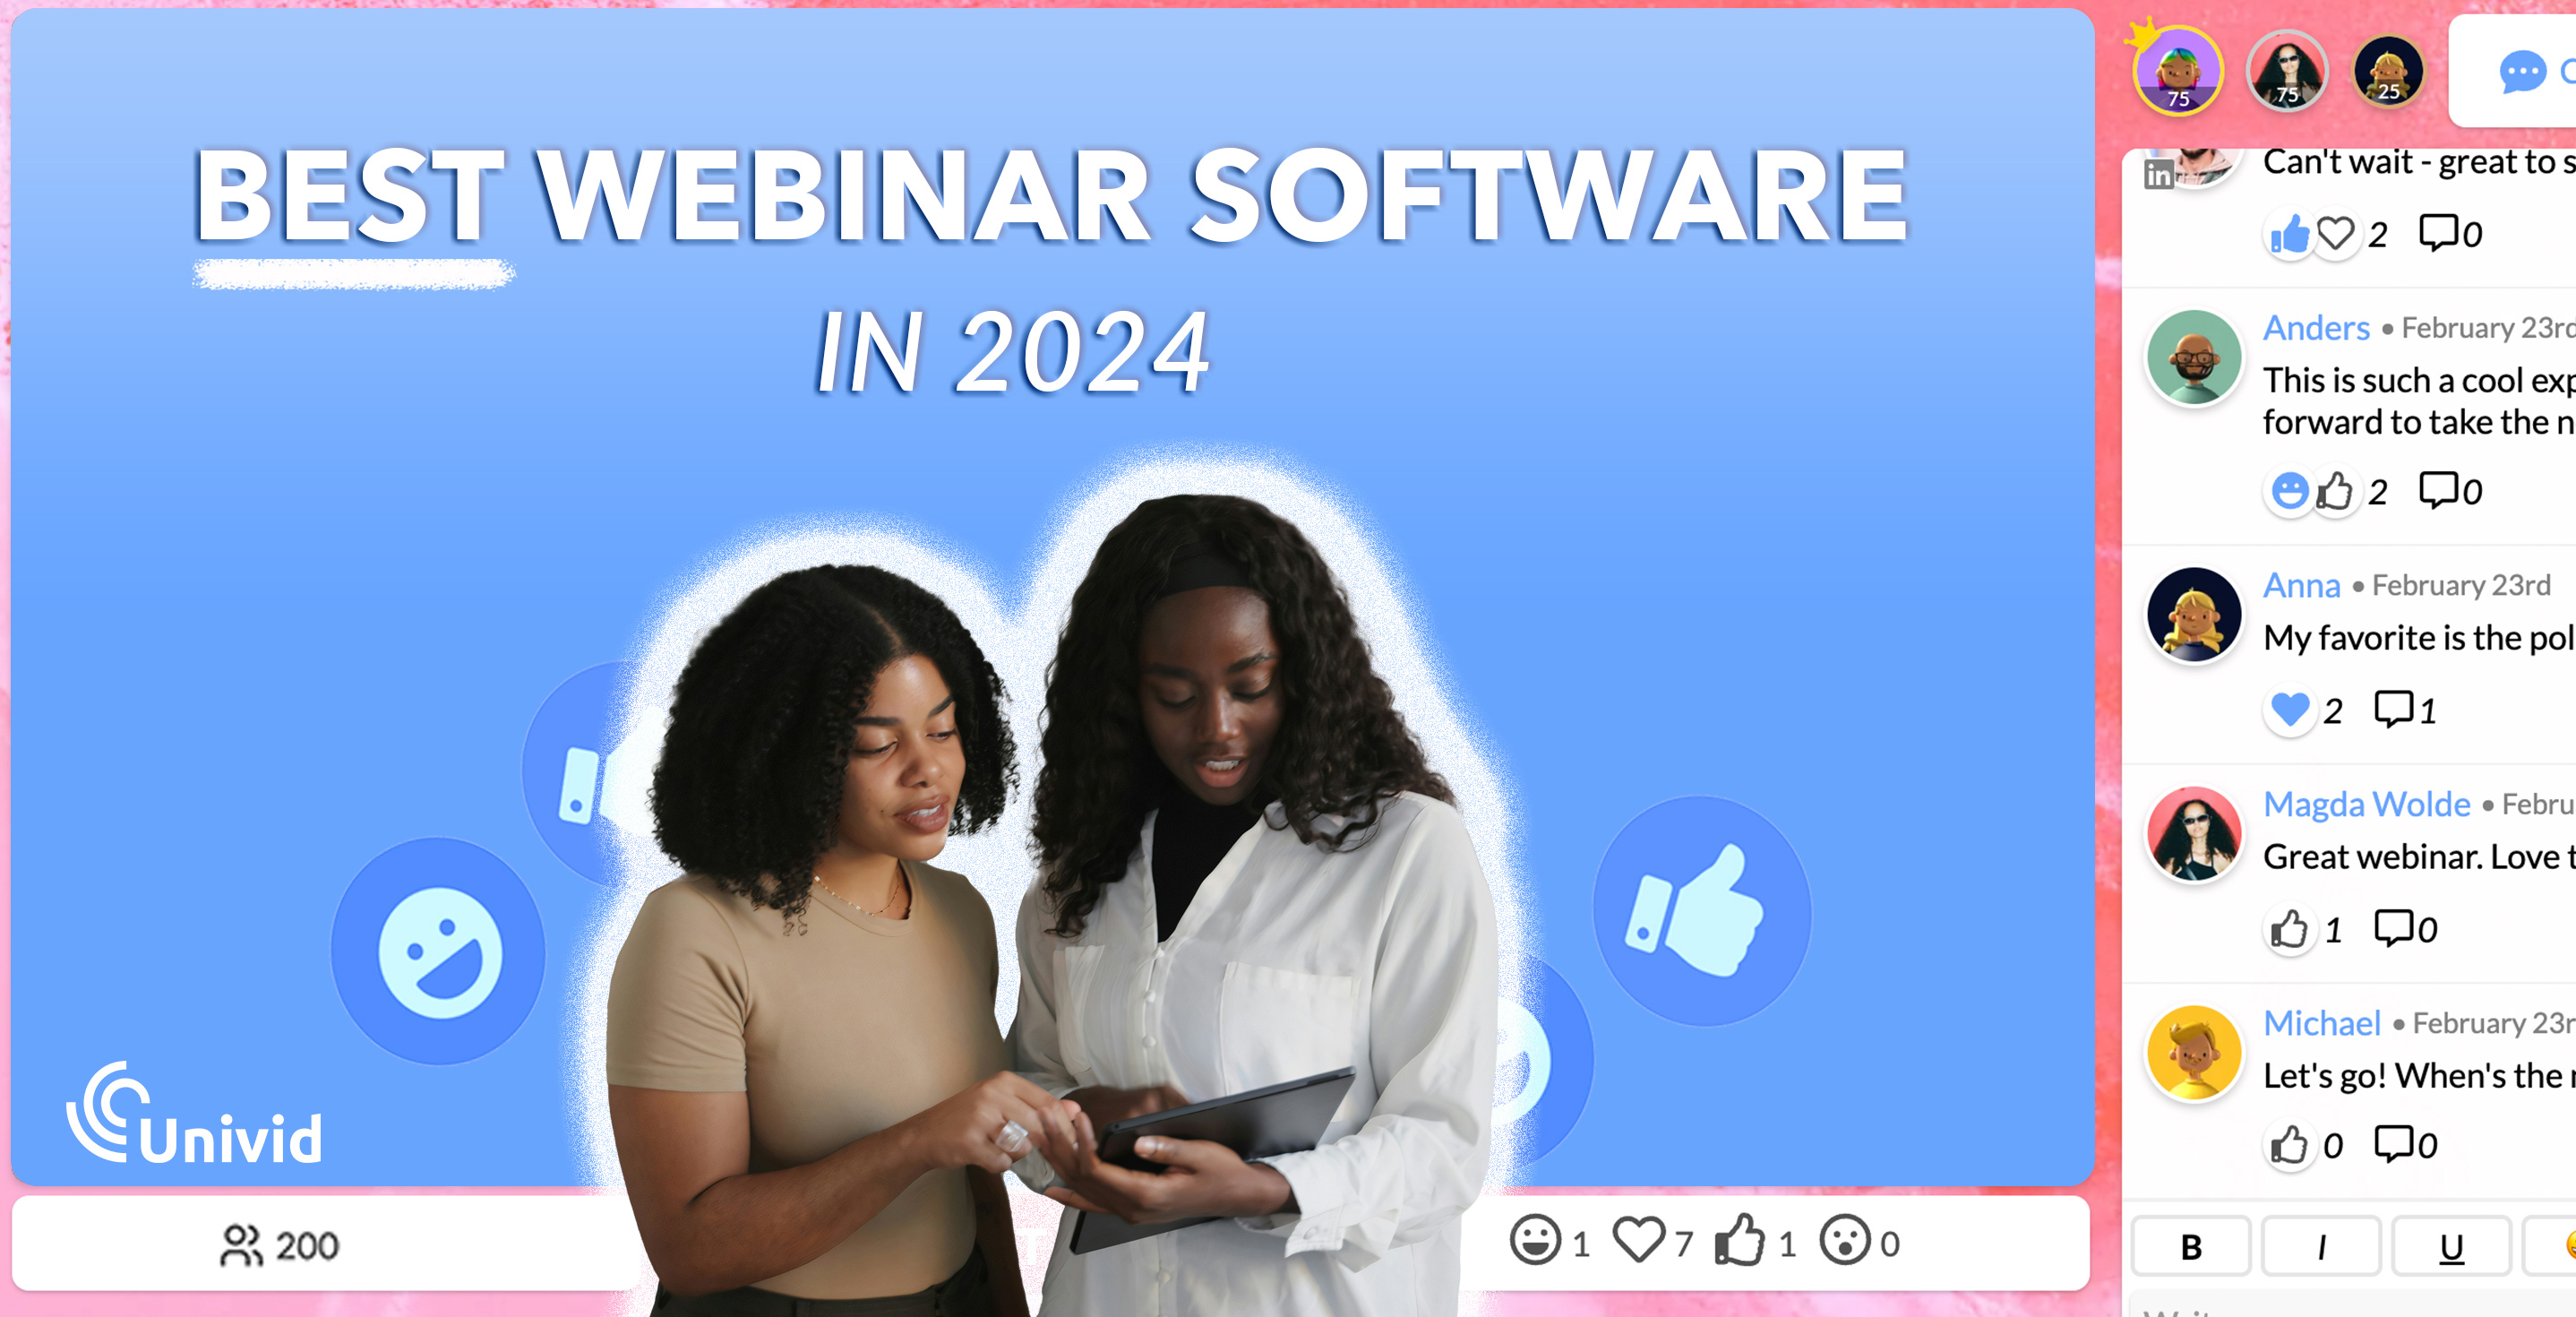 Hosting successful webinars can put your brand on the map, highlight your expertise and strengthen the connection to your audience. Planning ahead and having the right tools are a big part of the success. Let's make it easier for you with a list of the best webinar software in 2024.